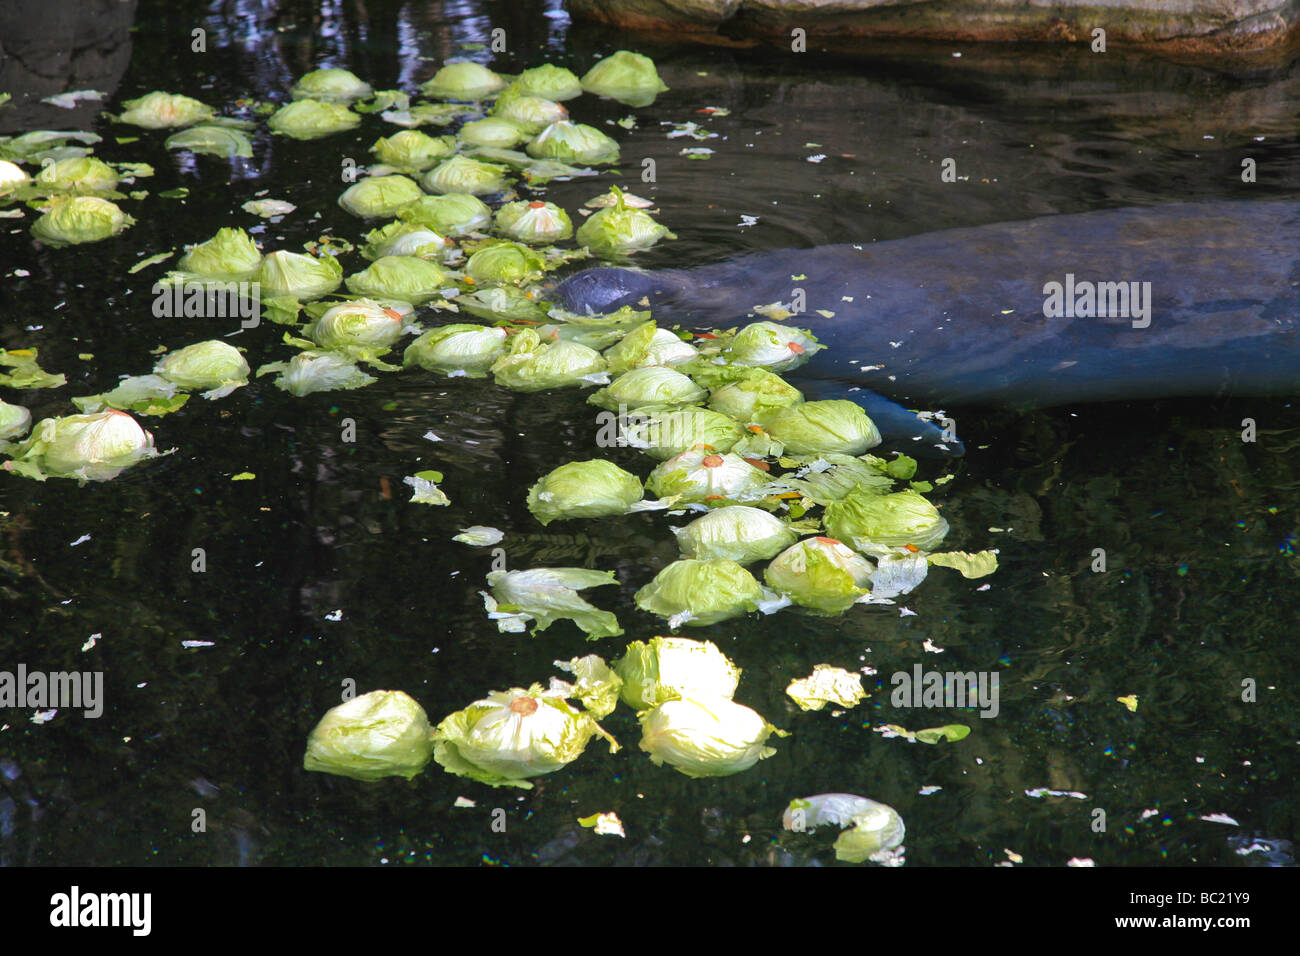 West Indian manatee in Florida's waters, top view. Stock Photo